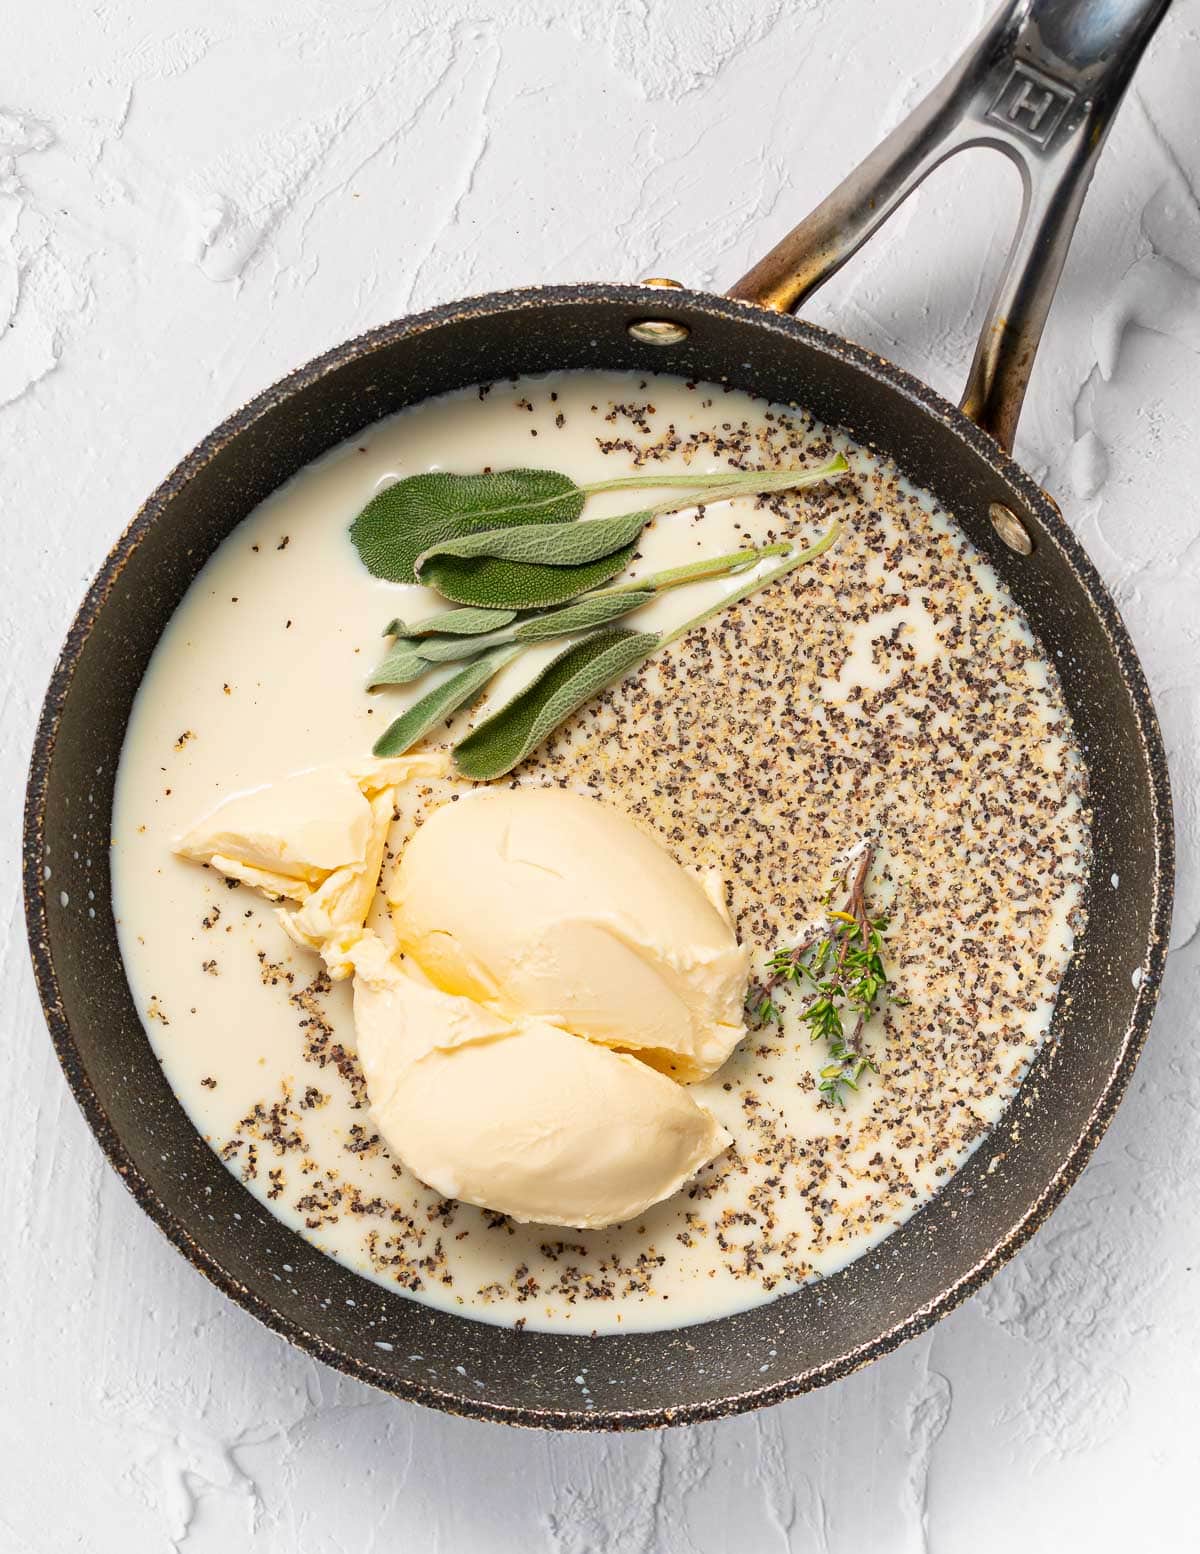 soy milk, vegan butter, pepper and herbs in a pan